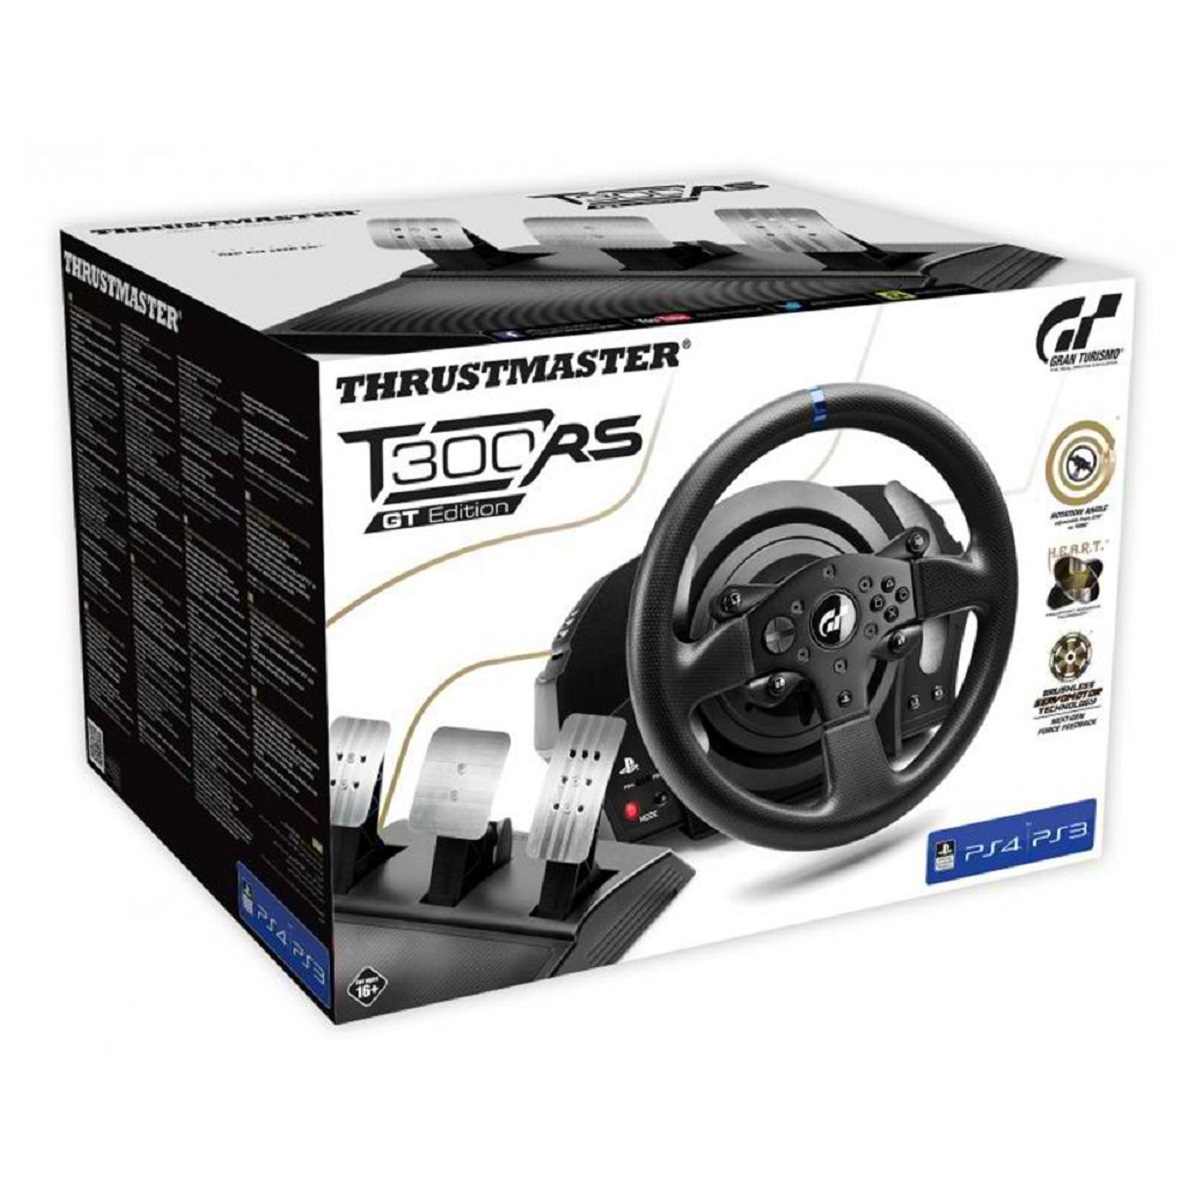 What To Attach To Your Thrustmaster VG T300RS Racing Wheel